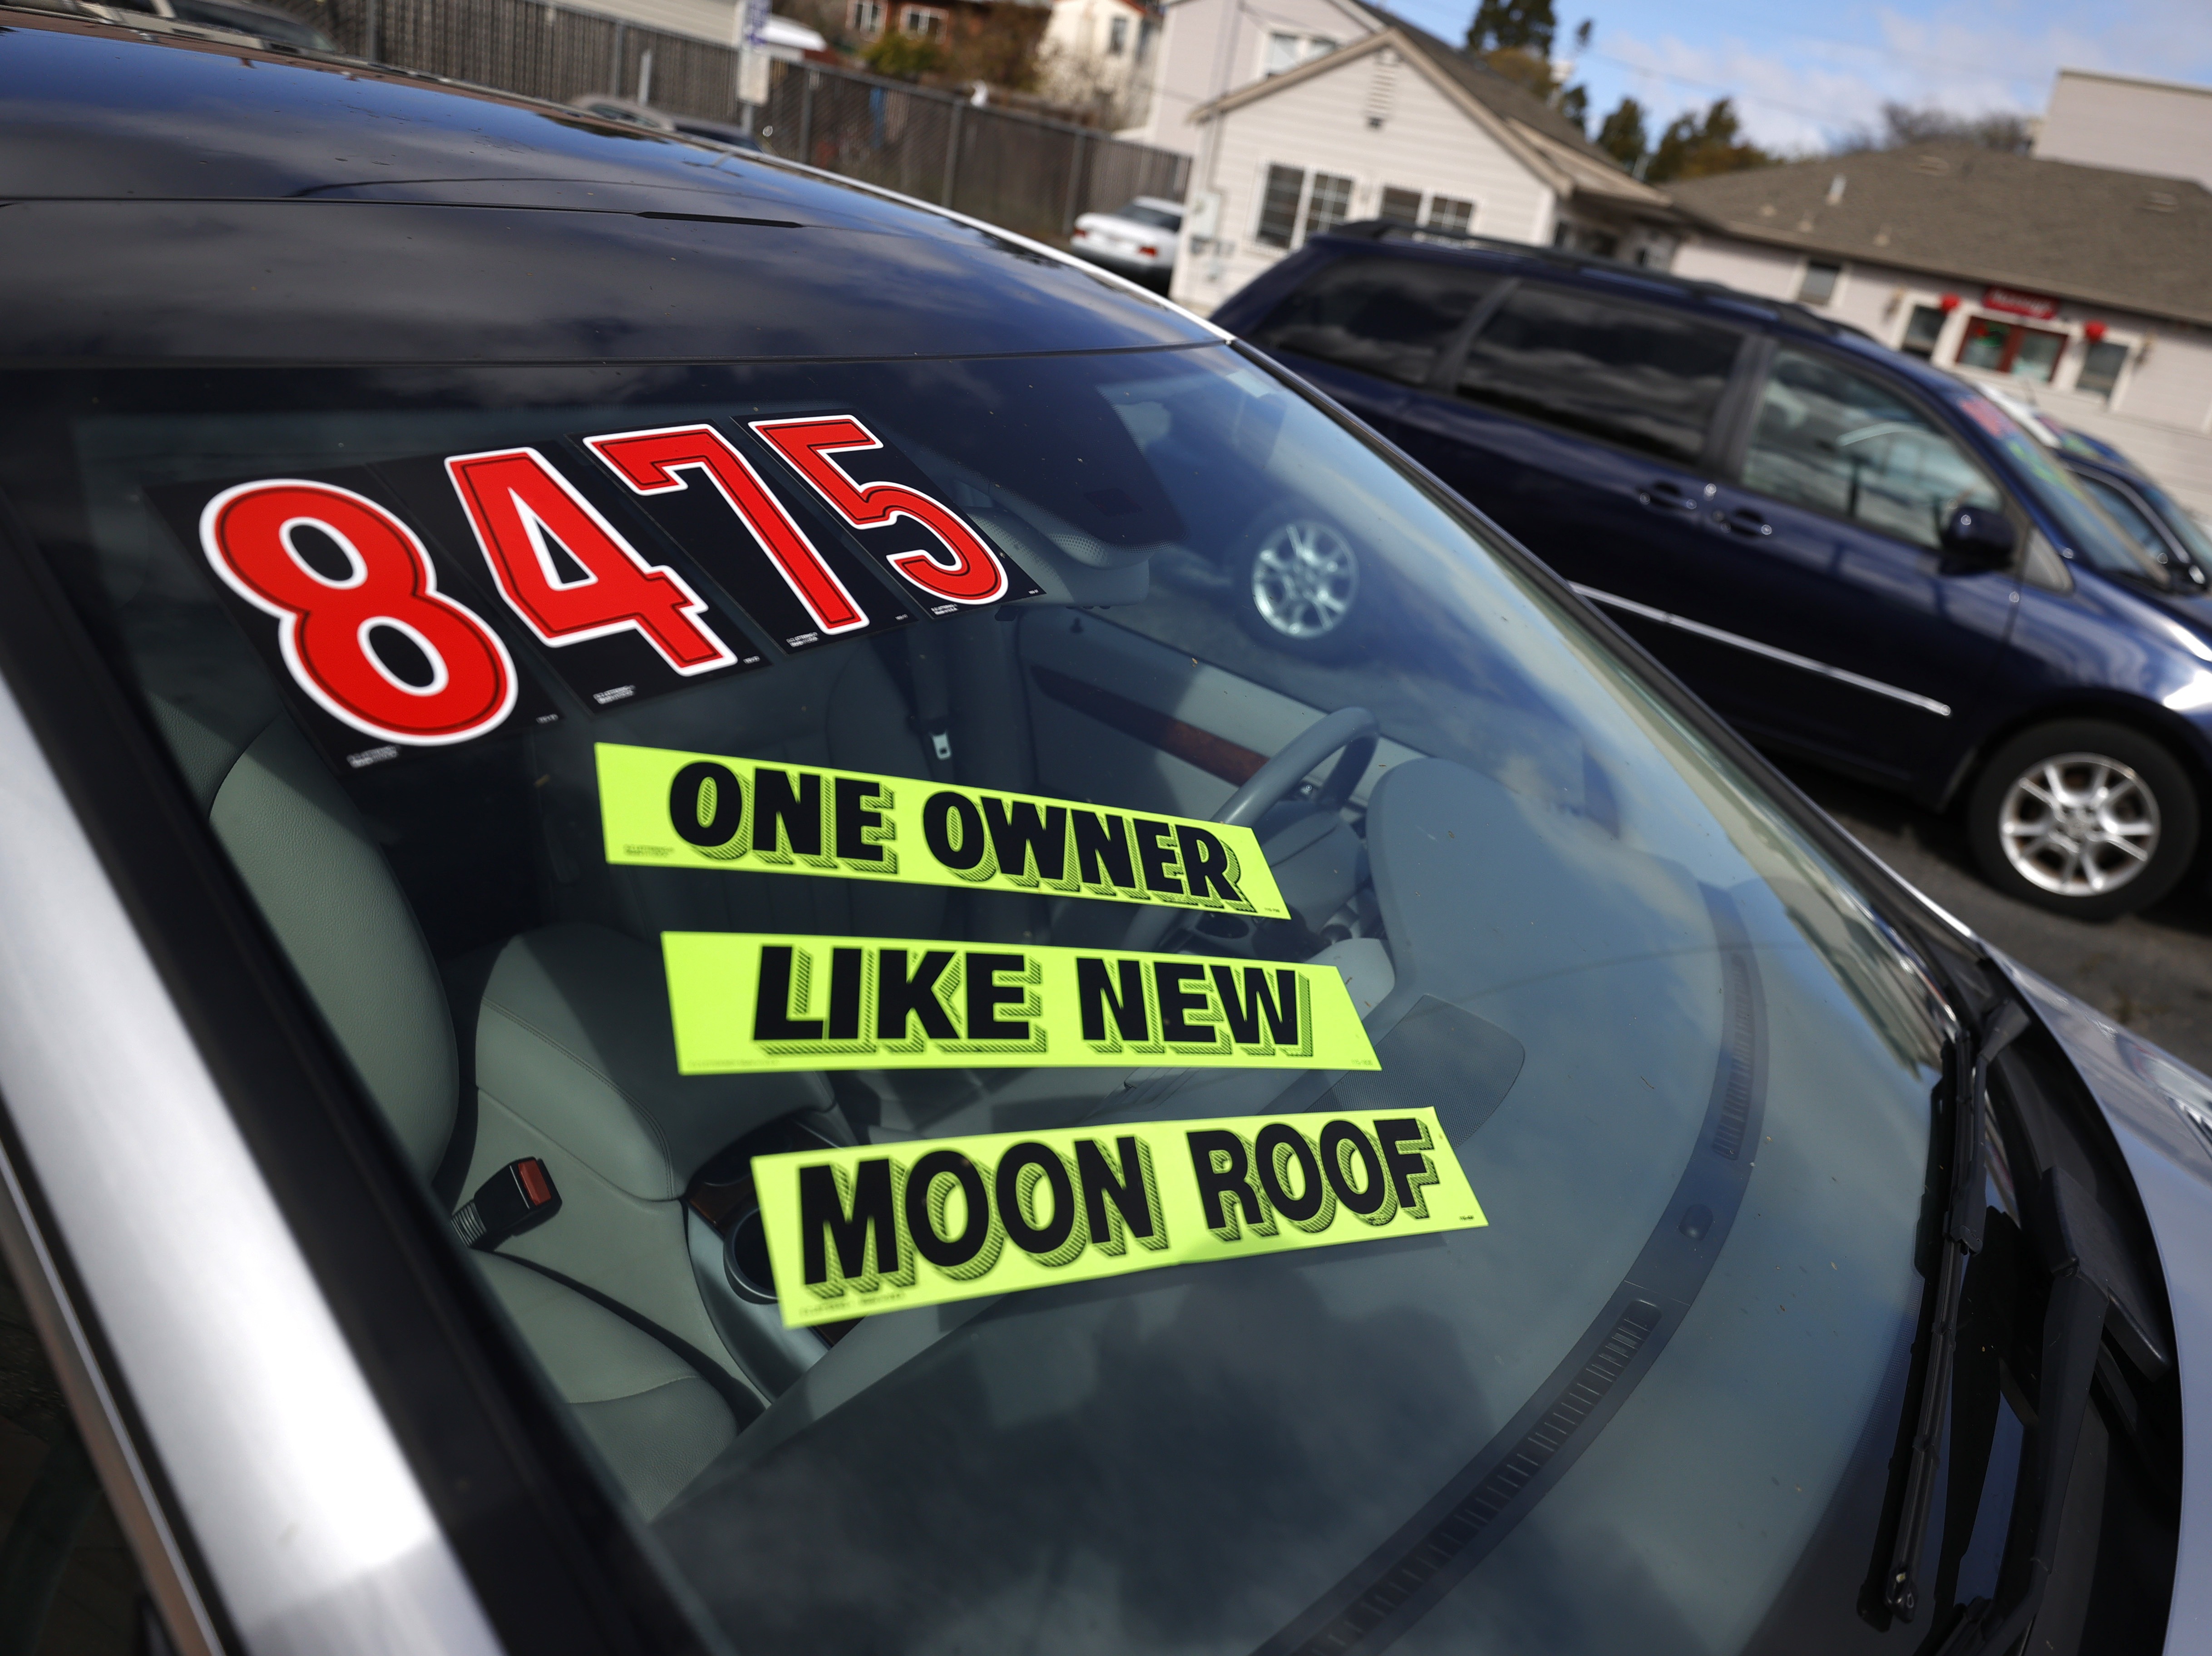 Used cars sit on the sales lot at Frank Bent's Wholesale Motors in El Cerrito, Calif., on March 15. Supply chain snarls and pent-up demand are driving up the prices of a lot of things, including new and used cars. CREDIT: Justin Sullivan/Getty Images